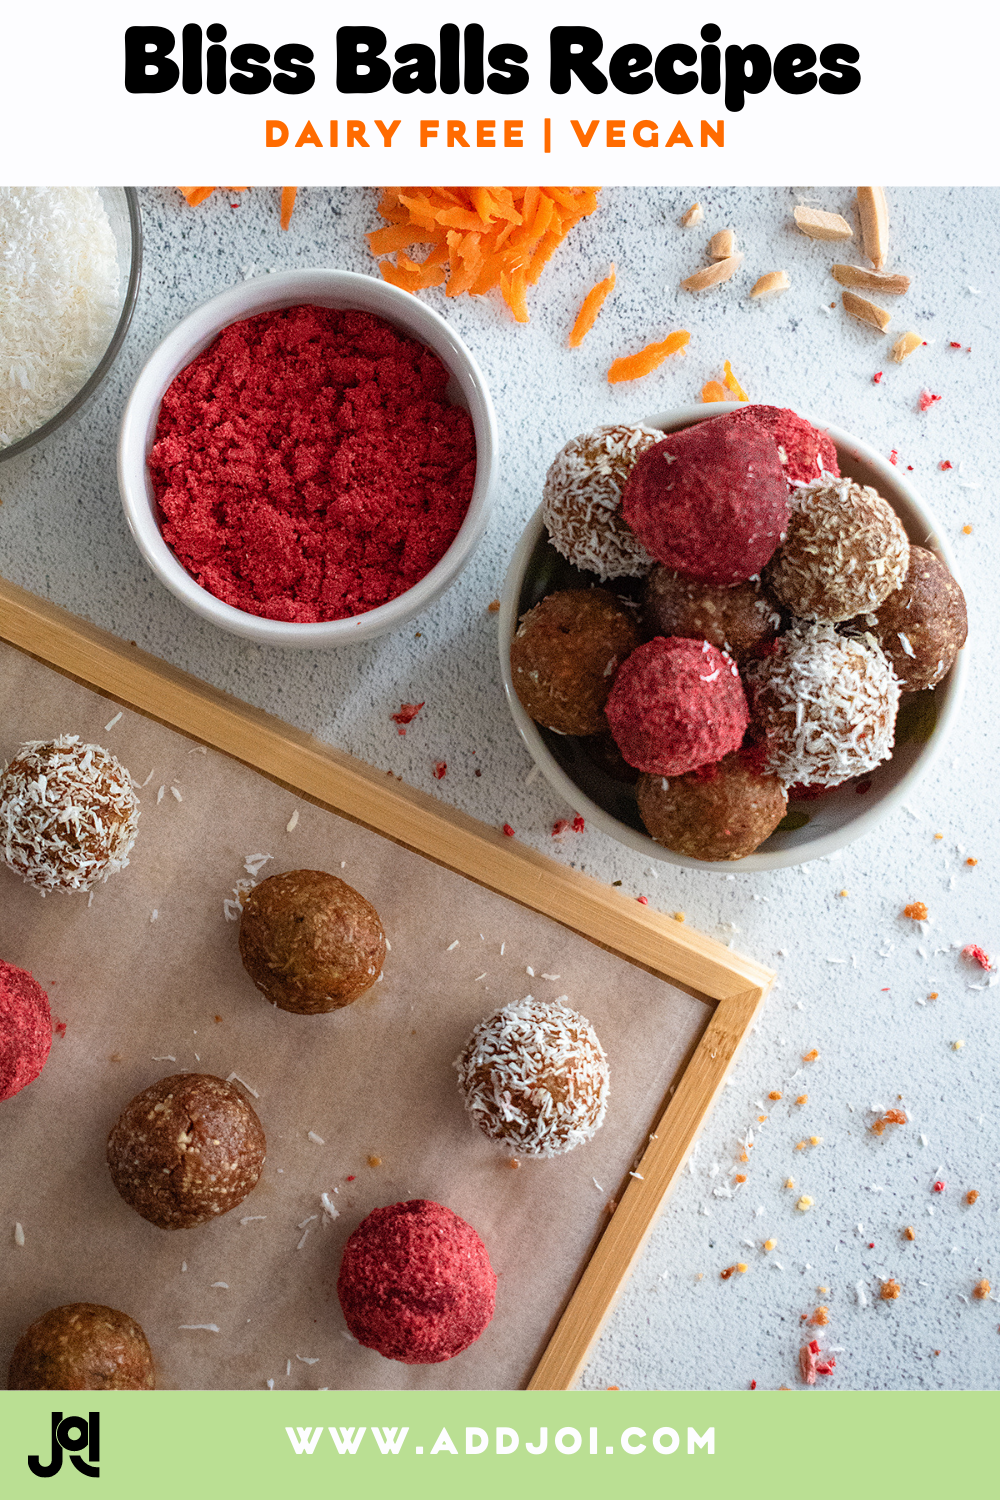 Healthy Spring Bliss Balls Recipes (Carrot Cake and Strawberry)